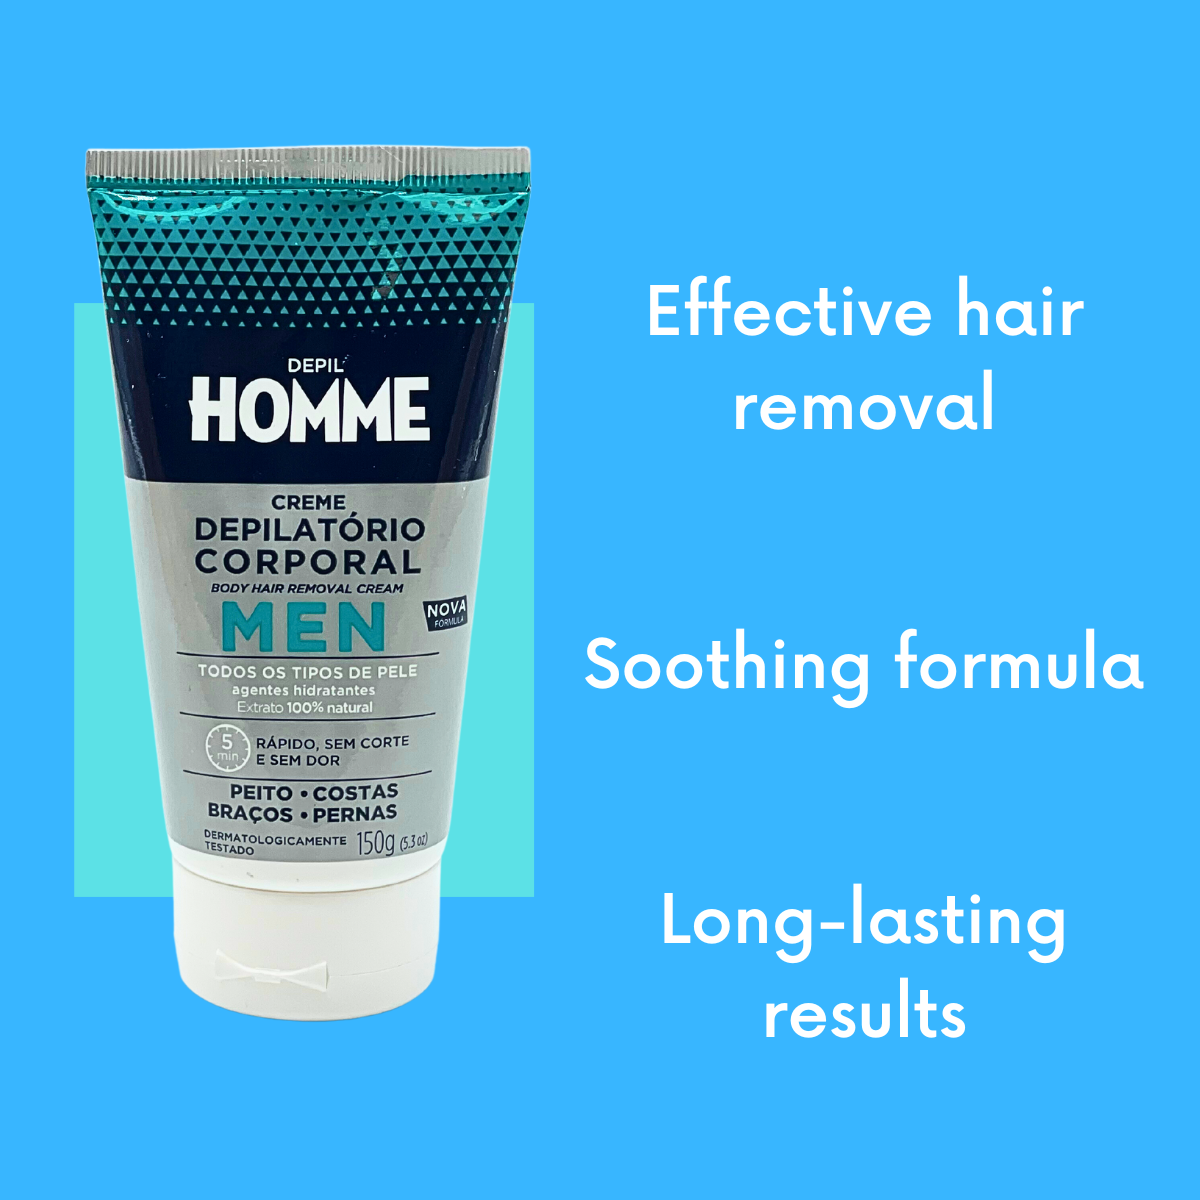 Depil HOMME Hair Removal Body Cream, Soothing Depilatory Cream 150g - Buy professional cosmetics dedicated to hair removal